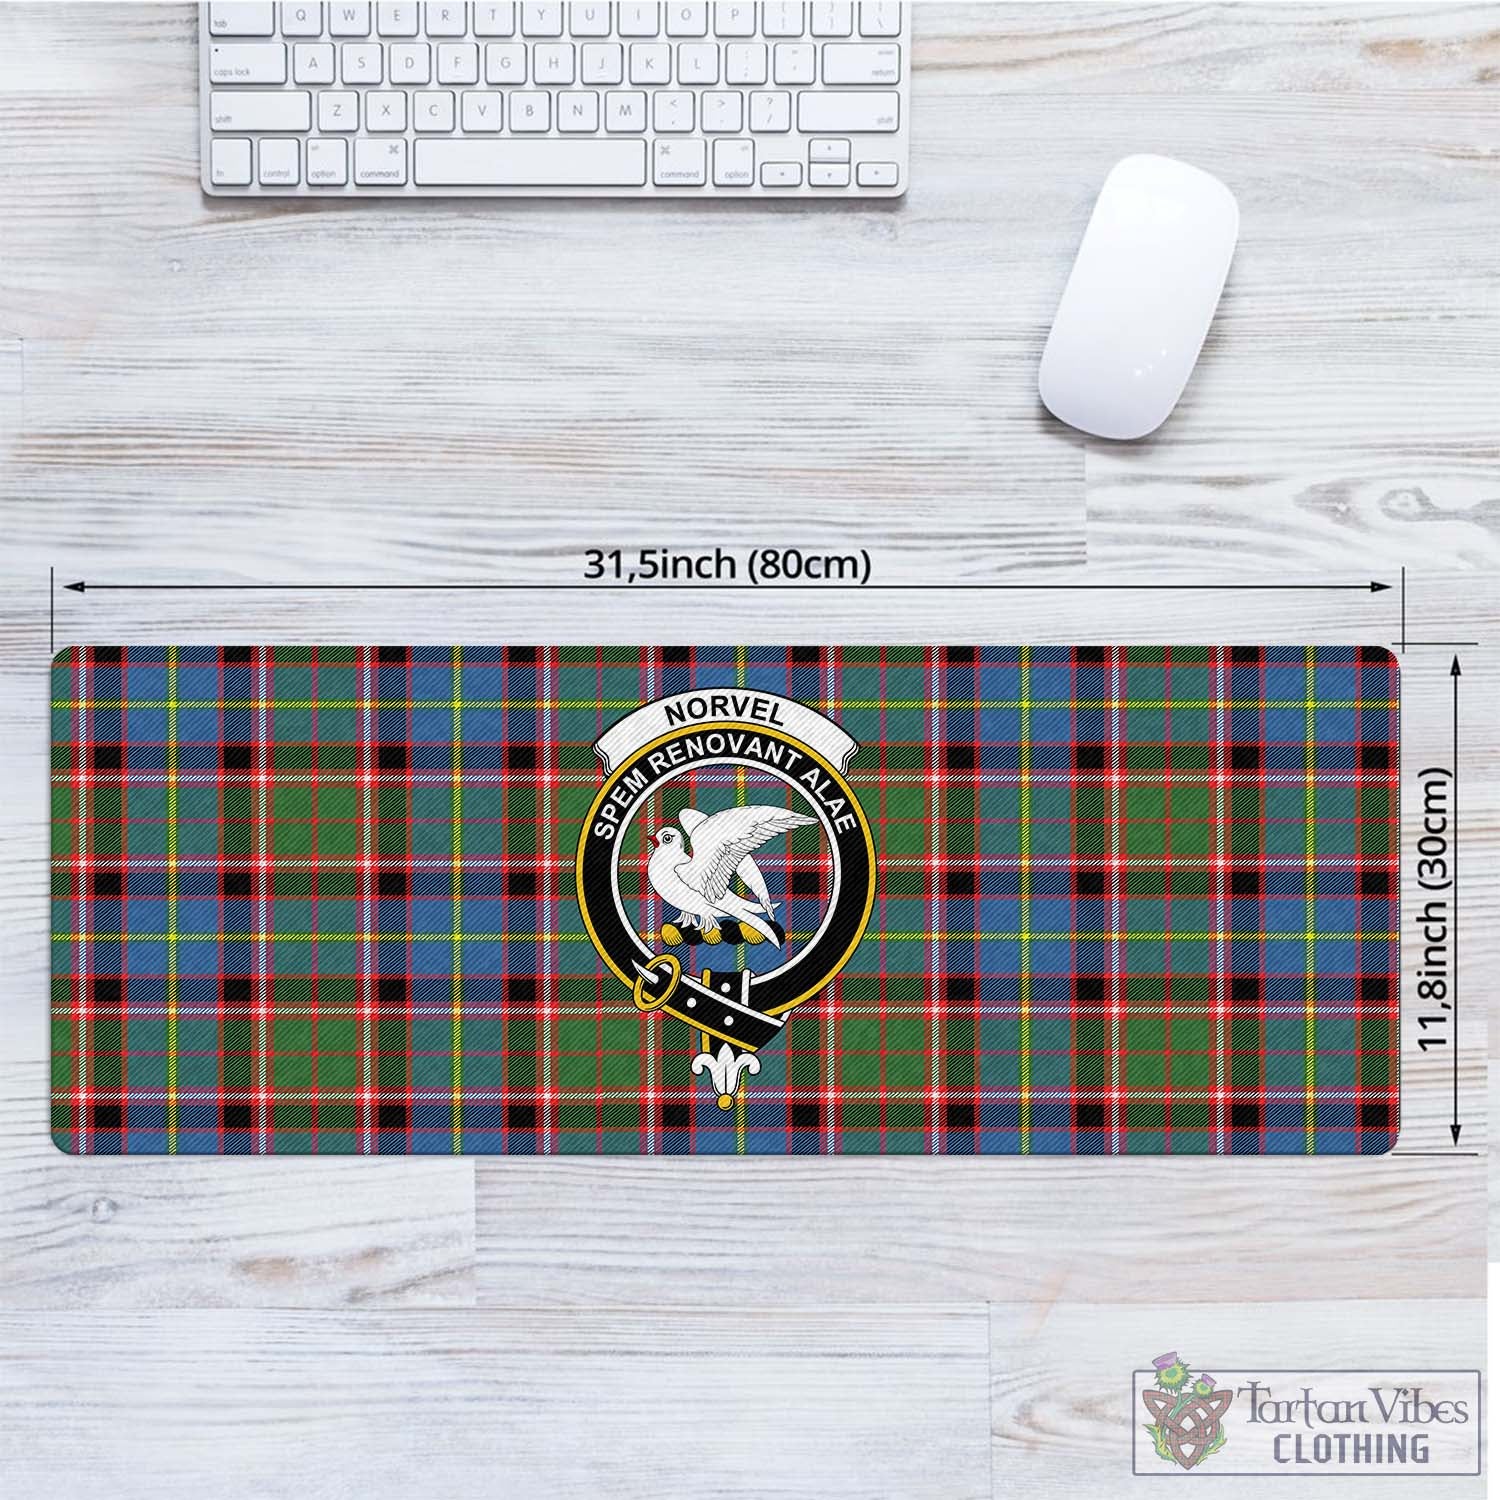 Tartan Vibes Clothing Norvel Tartan Mouse Pad with Family Crest